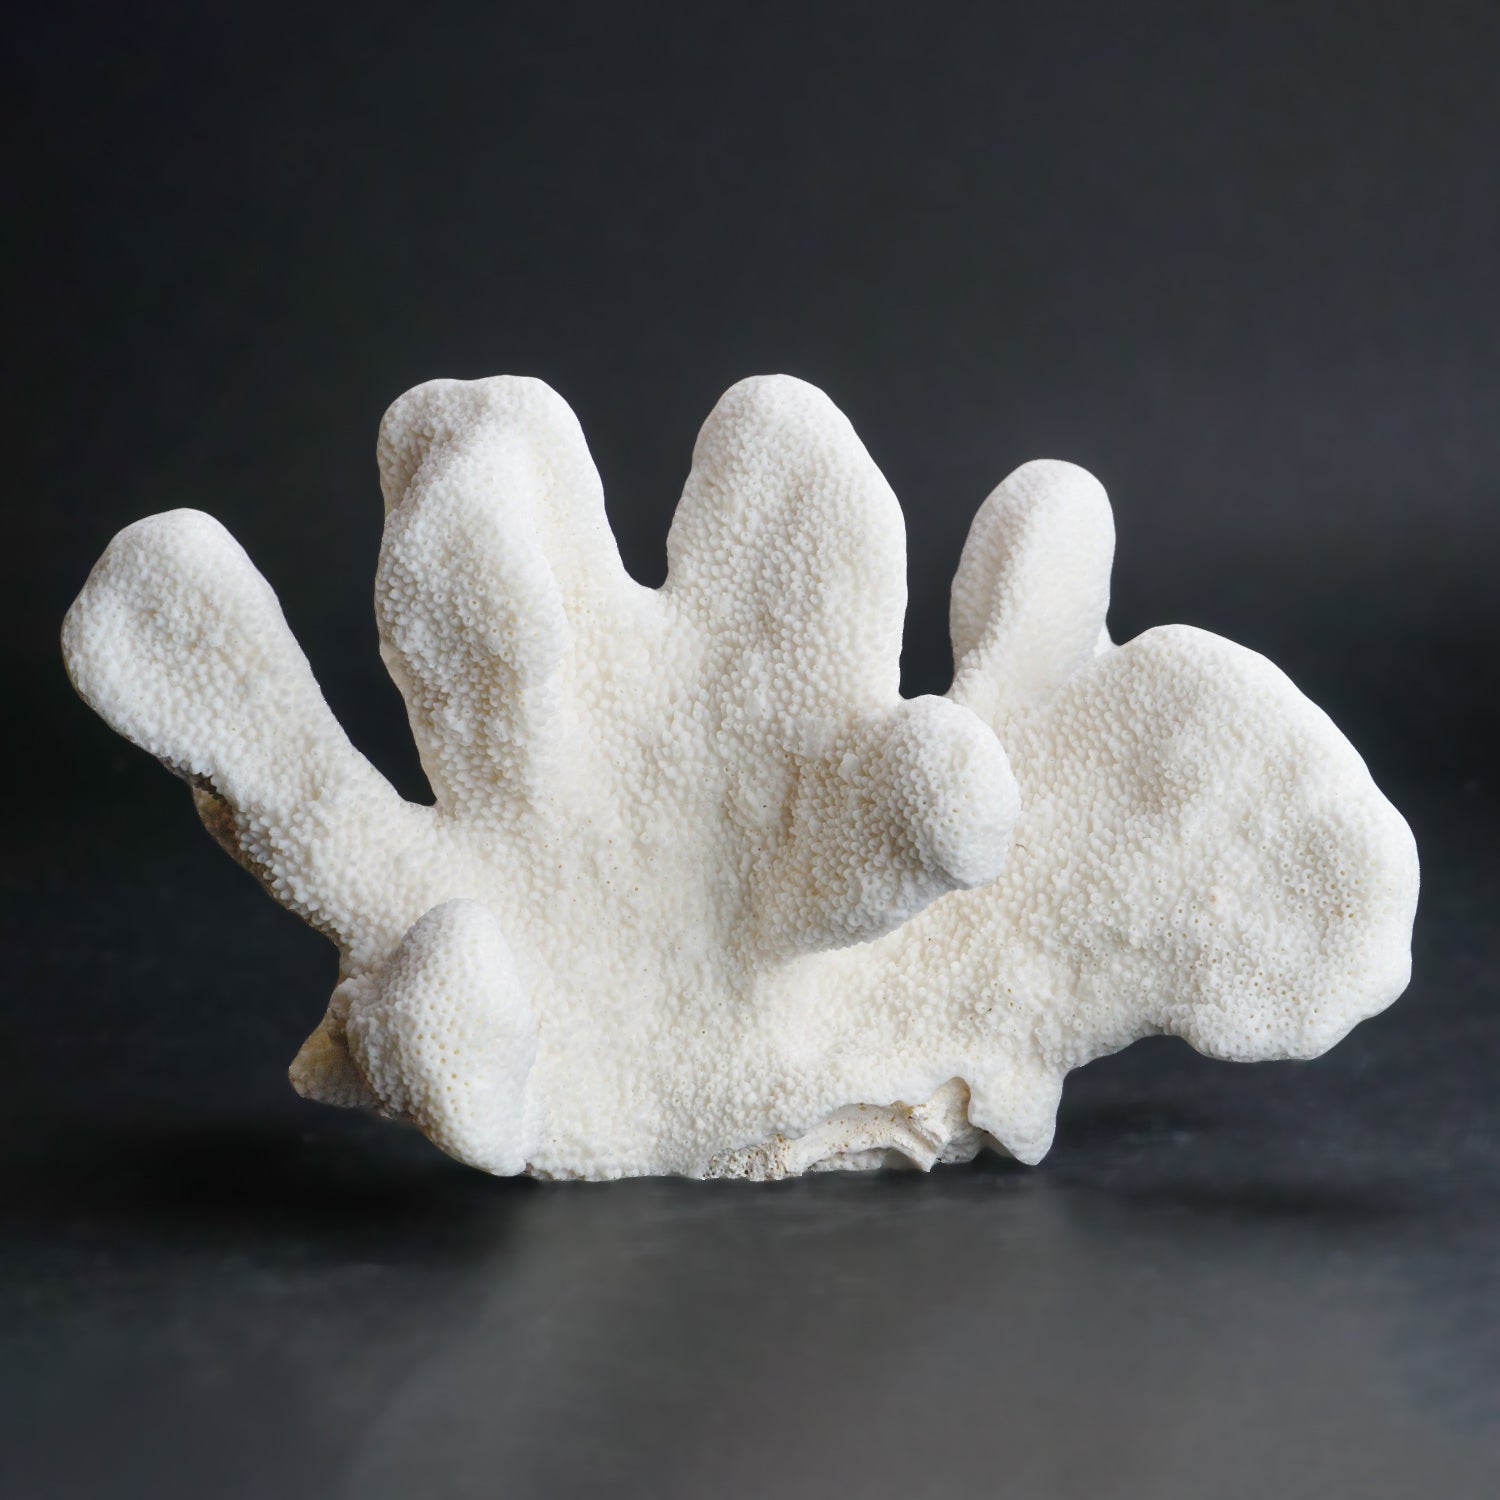 Genuine White Cat's Paw Coral (2 lbs)